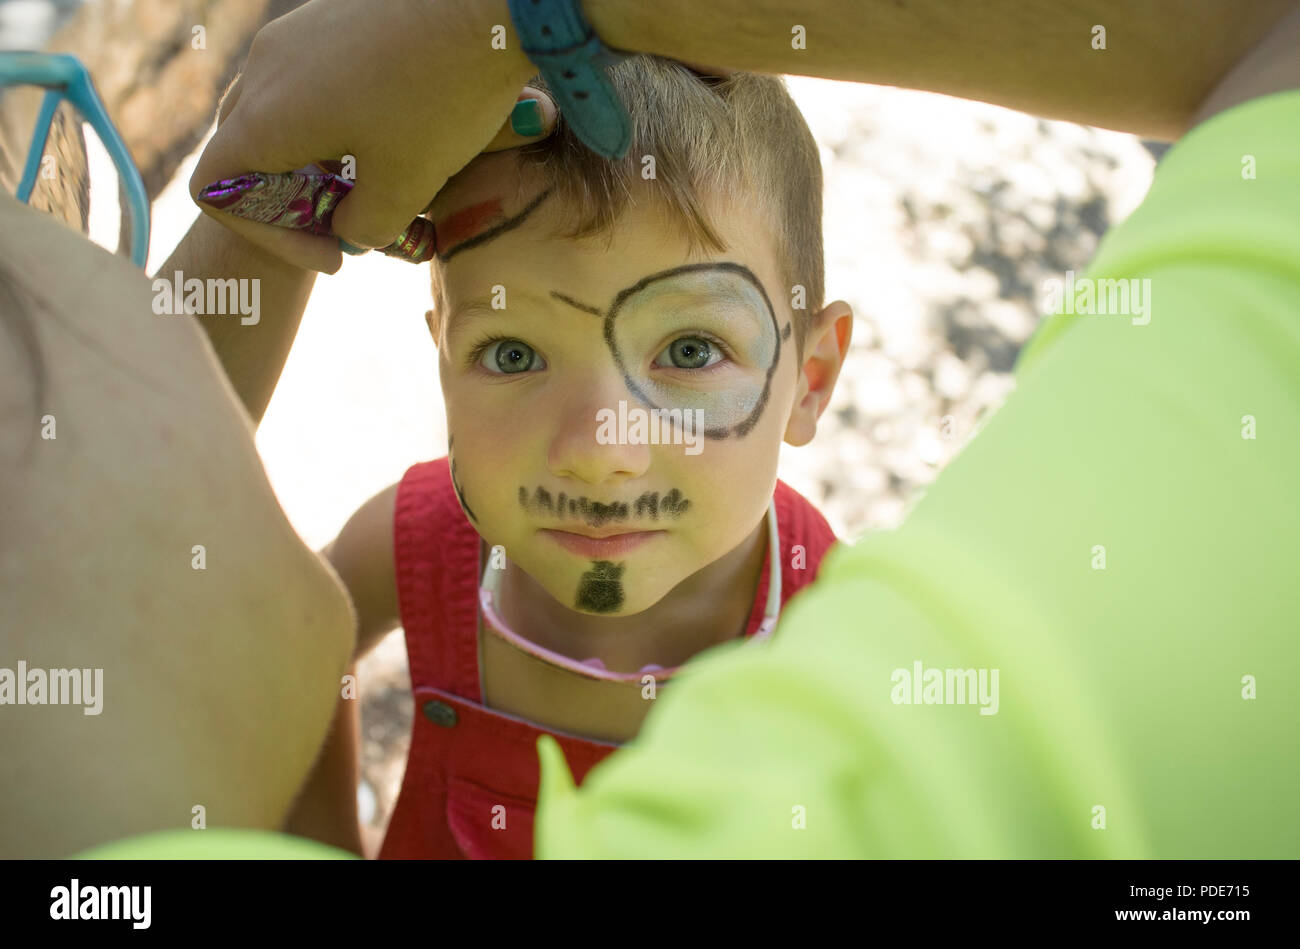 Little boy getting face painted during outdoors party. The make-up artist uses face paint crayons Stock Photo